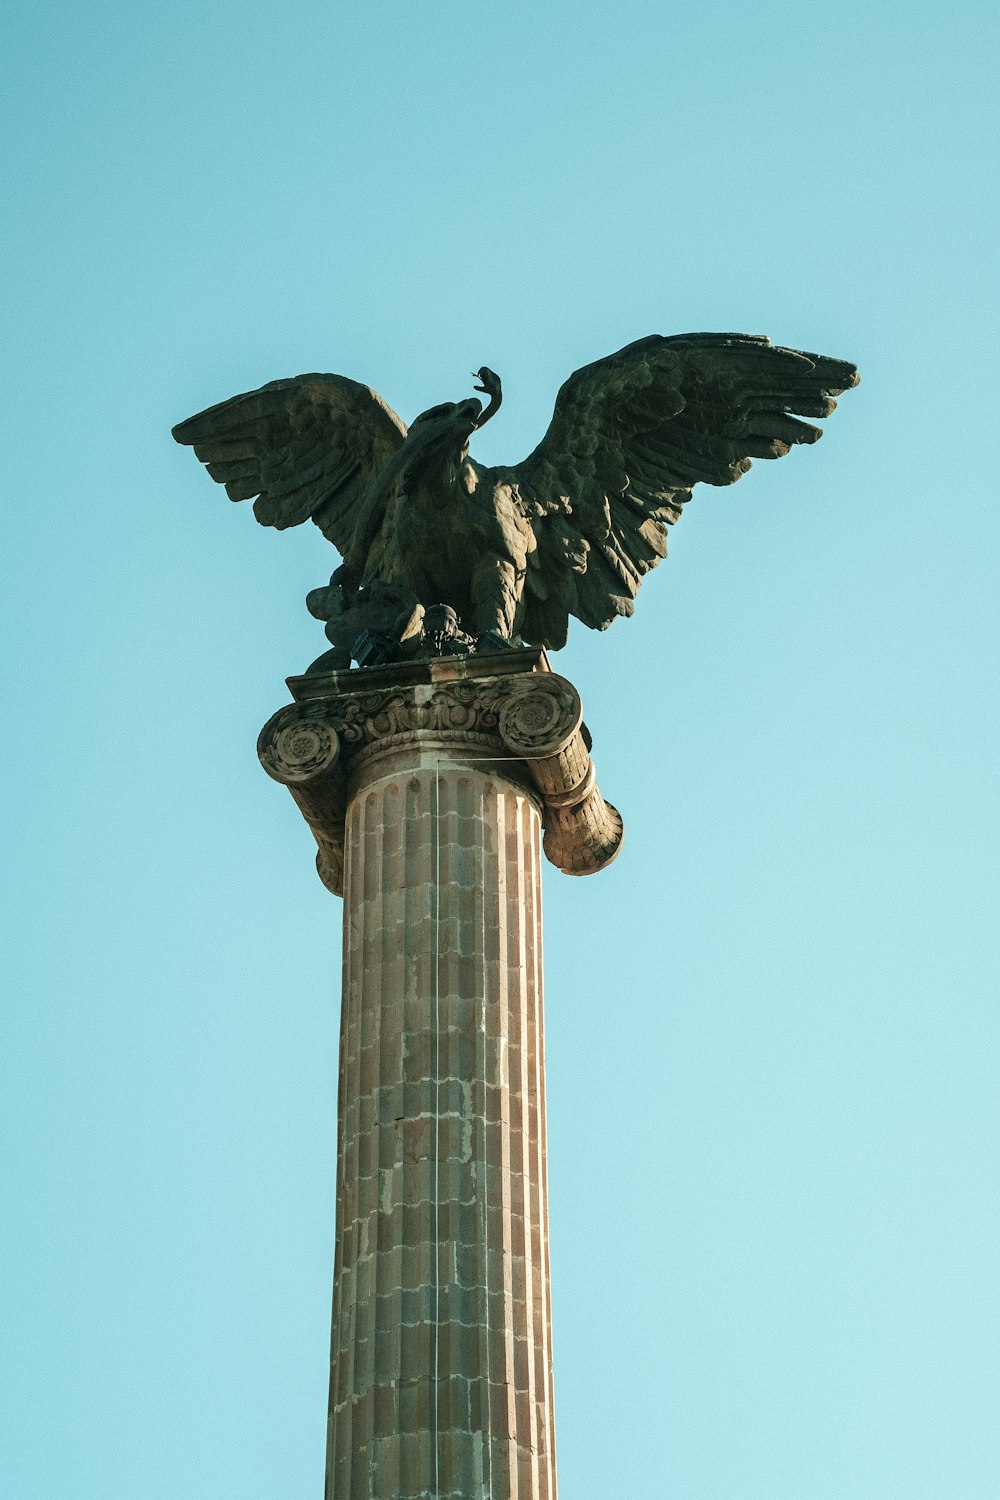 a statue of an eagle on top of a pillar